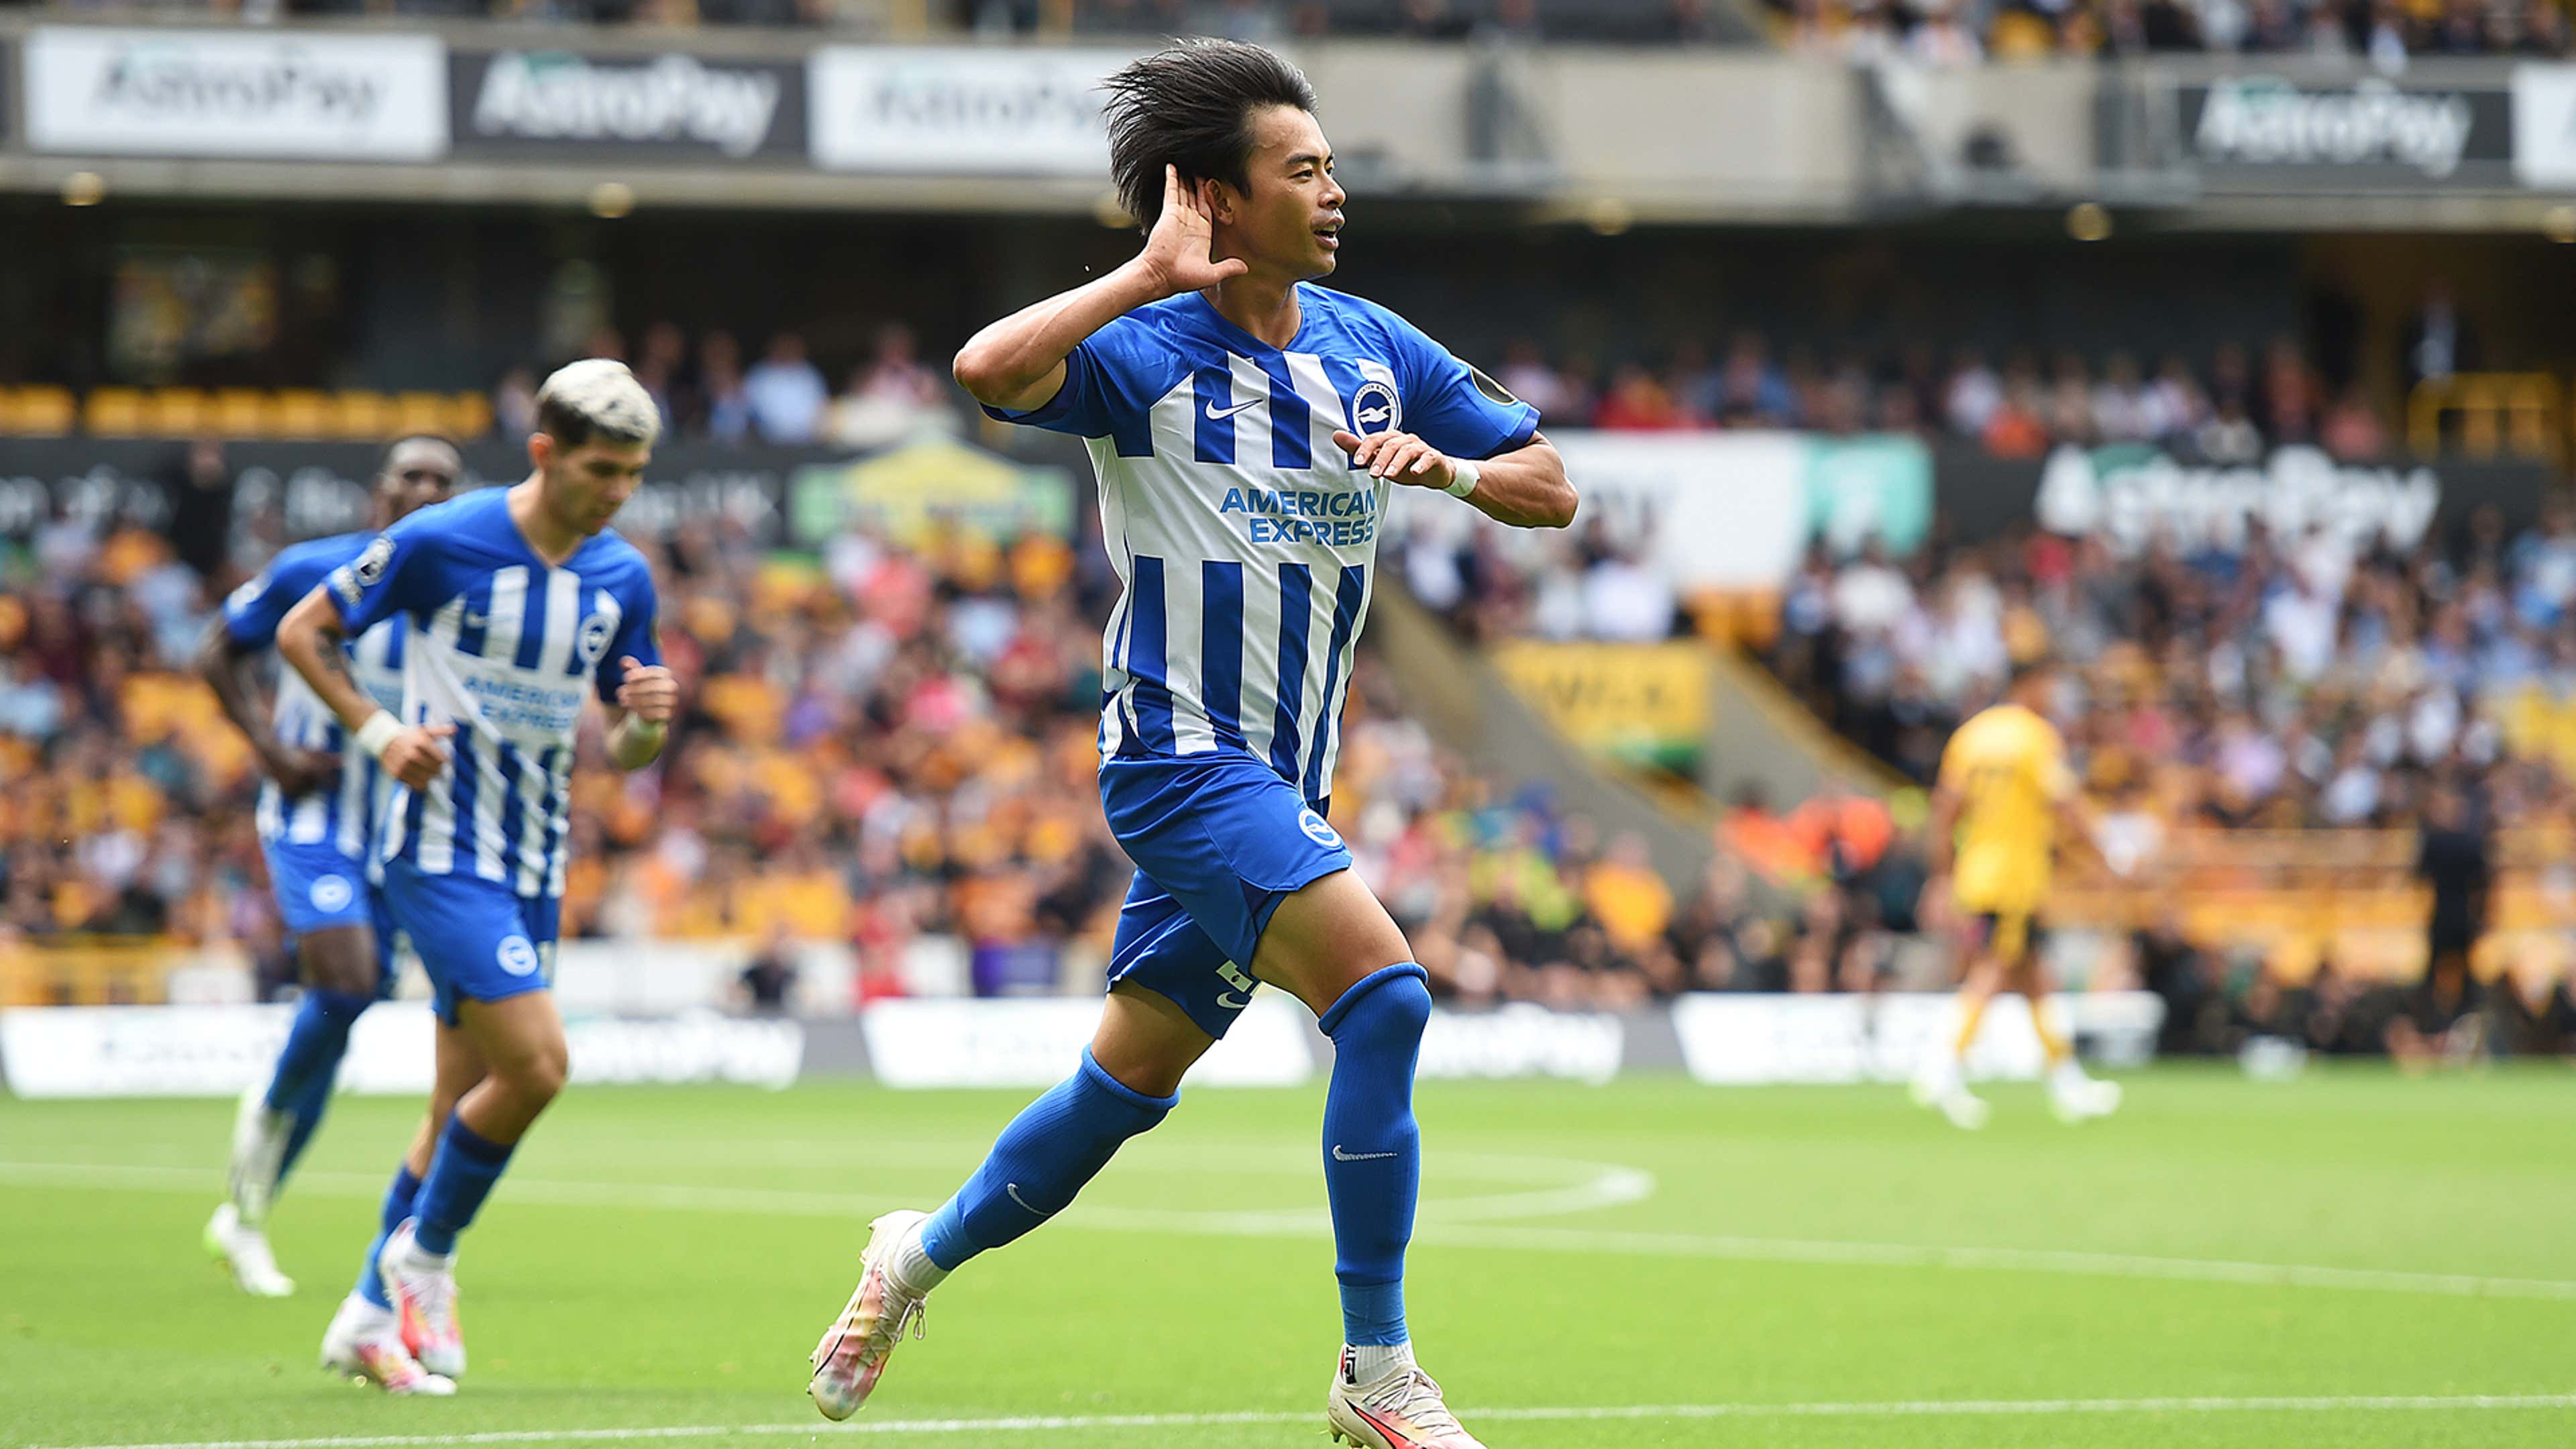  Kaoru Mitoma celebrates his solo goal against Wolves, running with the ball past the defenders and putting it in the back of the net.